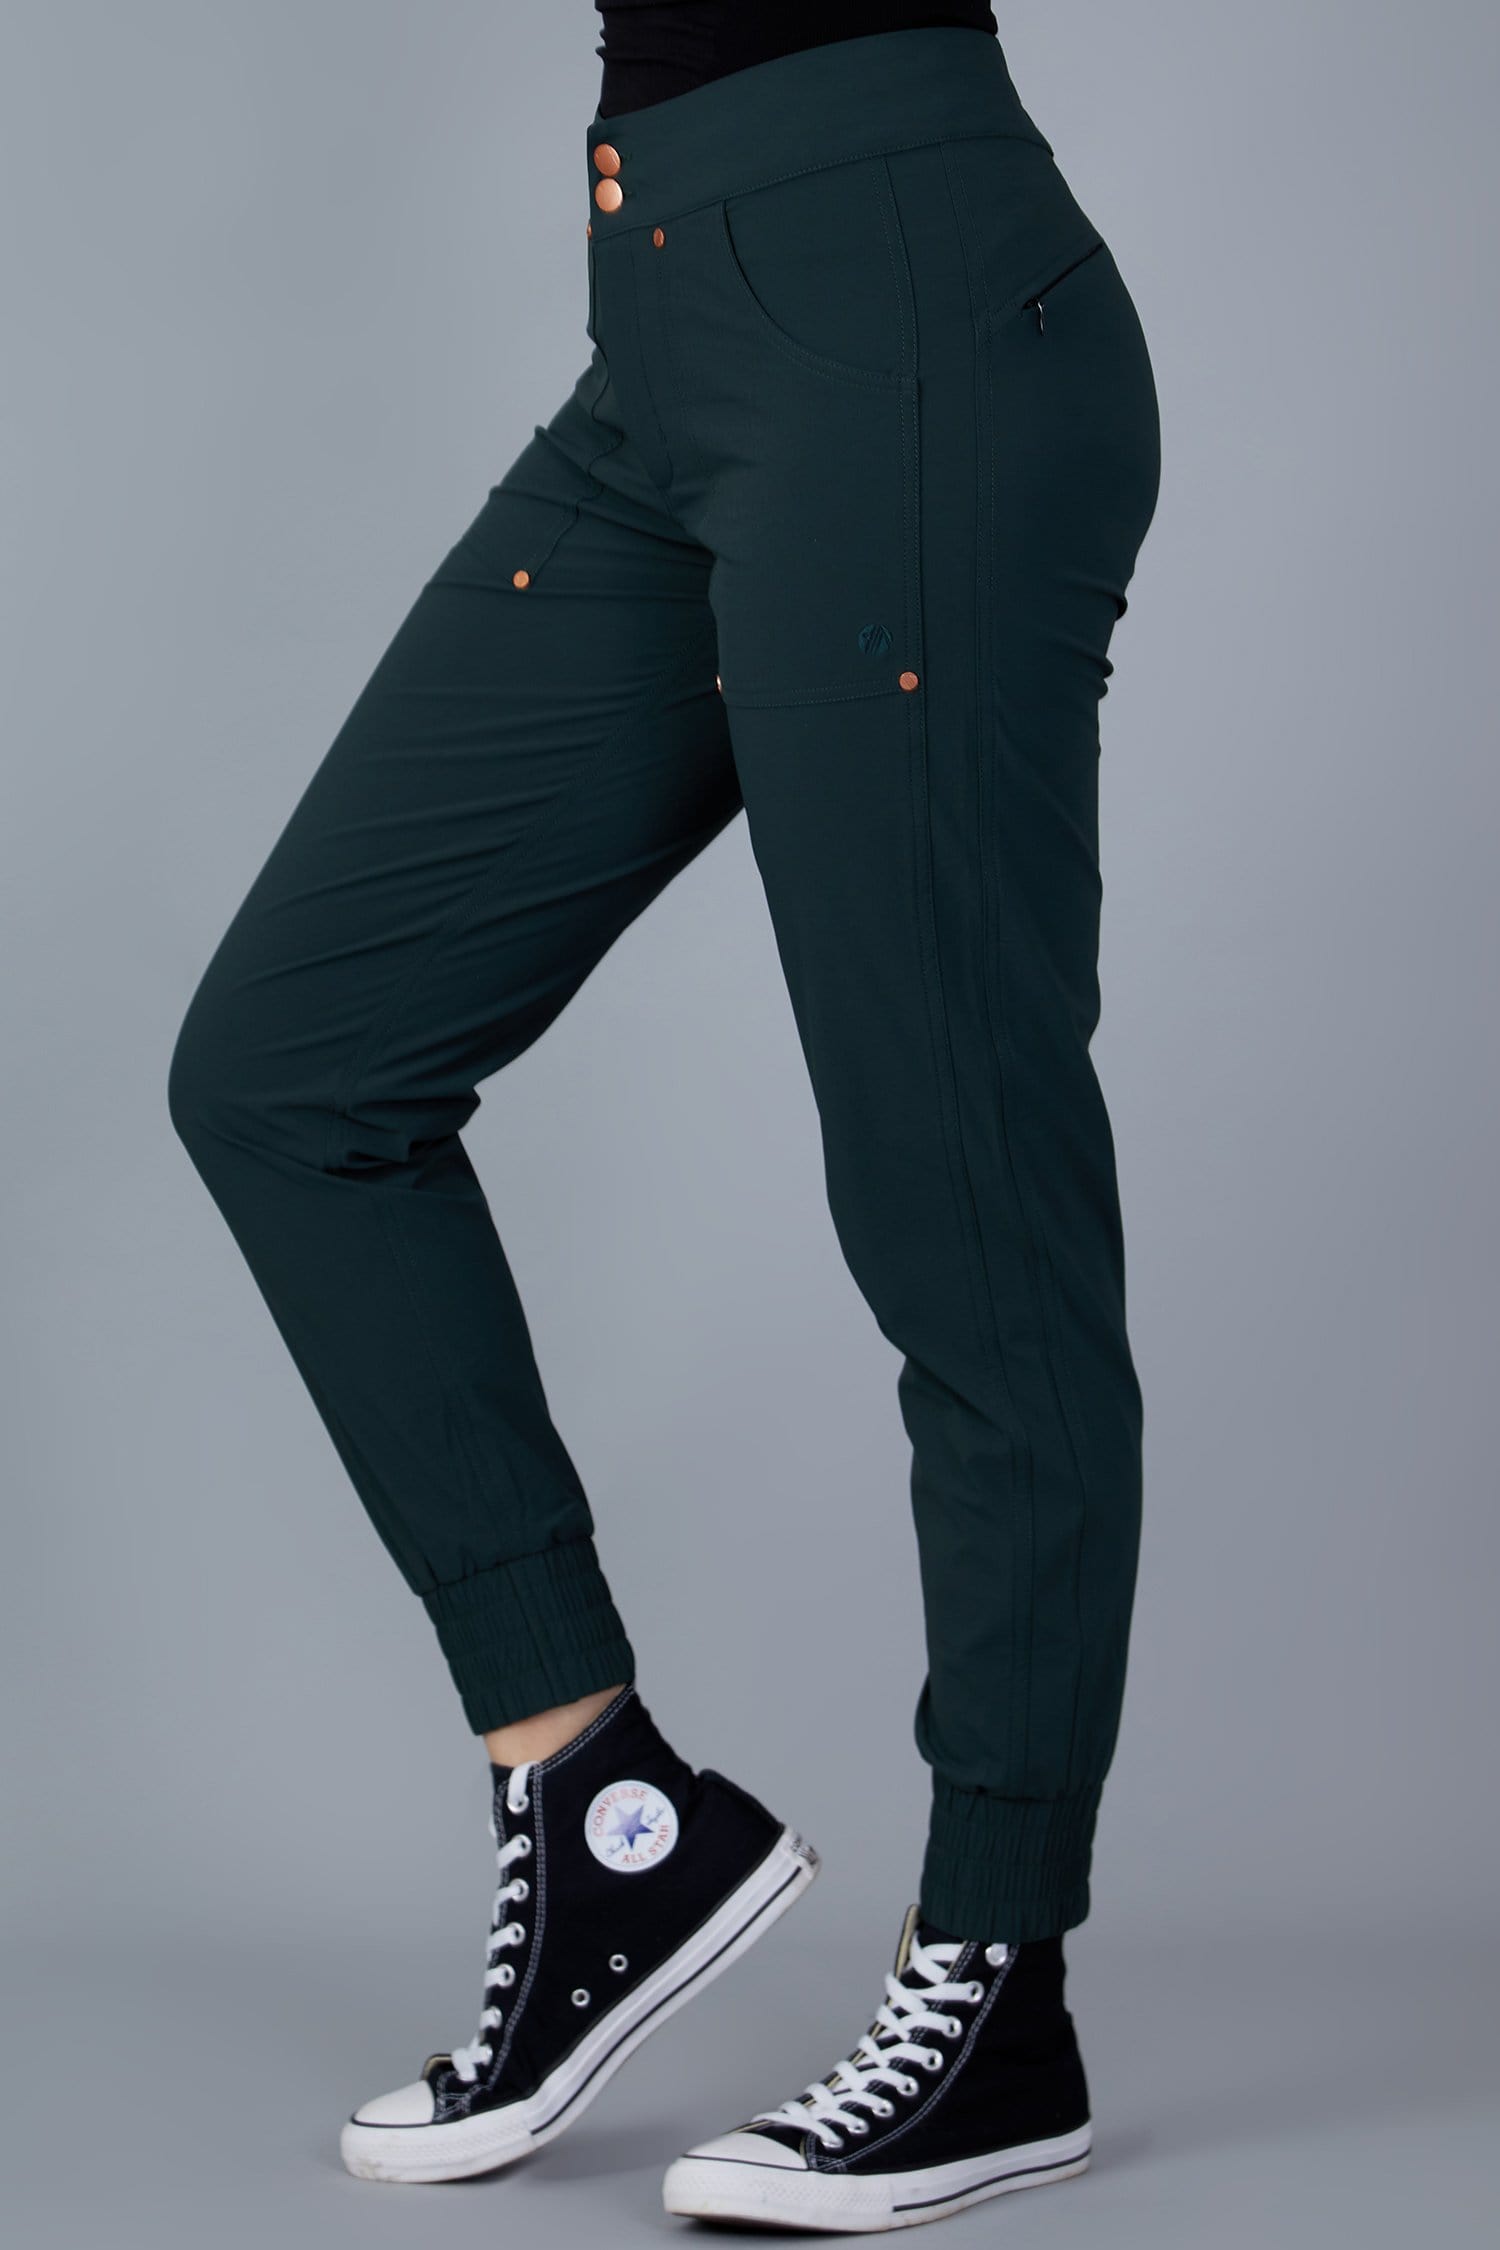 Casual Stroll Pants - Forest Green - 34l / Uk16 - Womens - Acai Outdoorwear